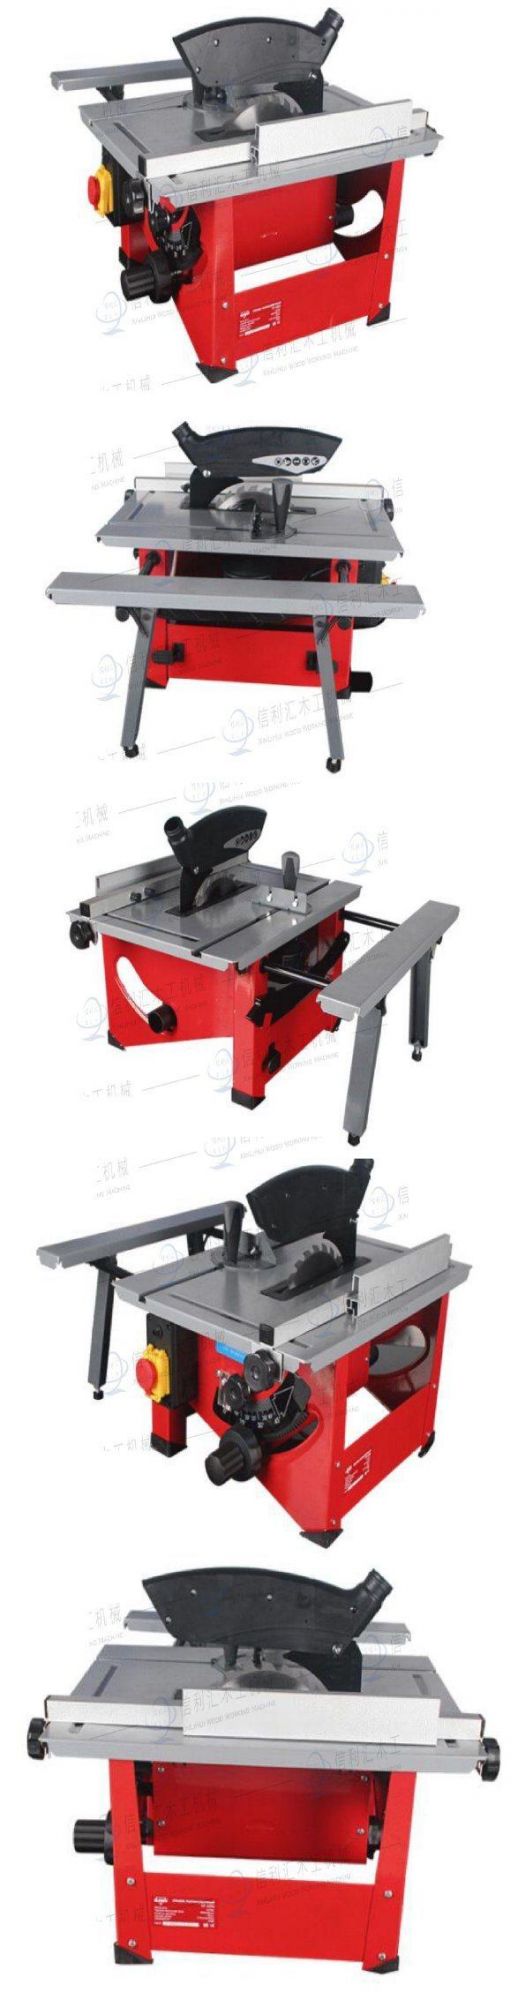 High Quality Custom DIY Small Hobby Mini Electric Wood Woodworking Cutting Circular Table Bench Saw Sawing Machine Small Saw with Hand Saw Blade